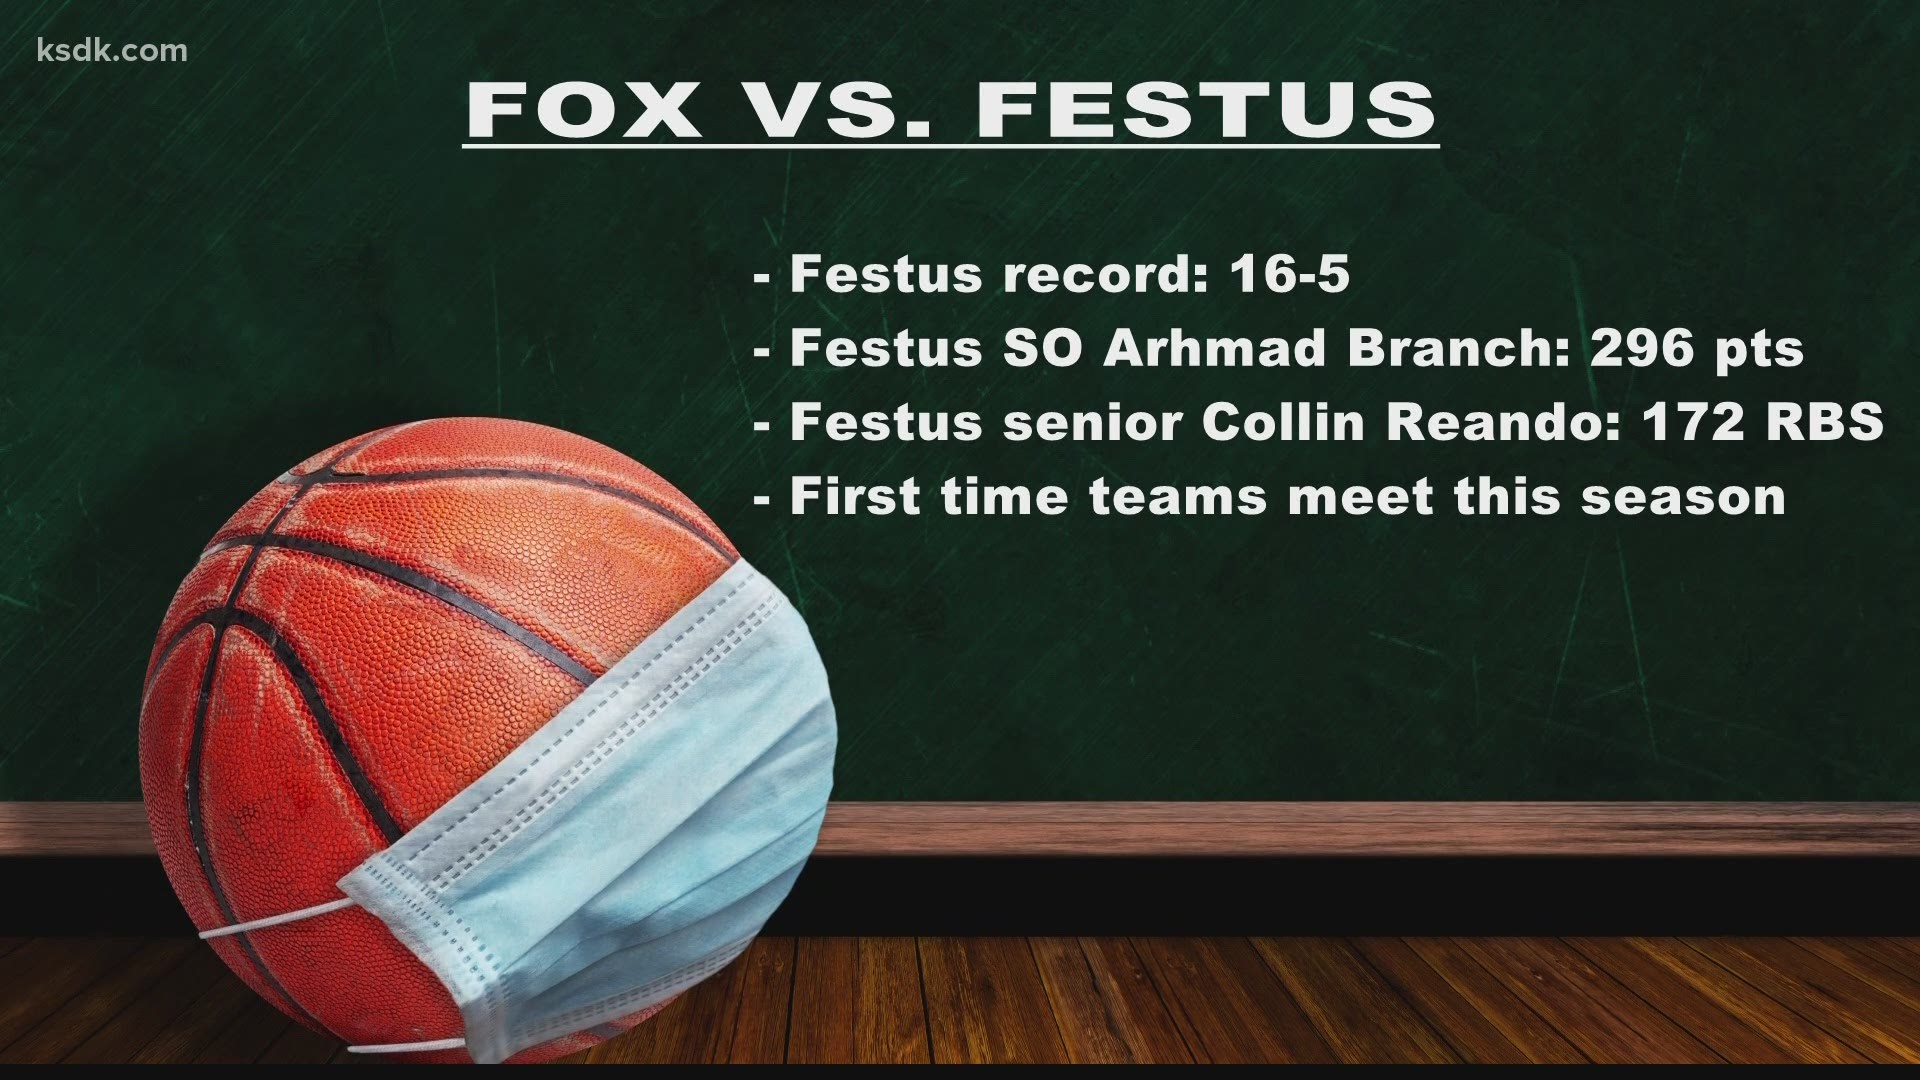 Festus has thrived all season with scoring from underclassmen, and senior leadership from senior Collin Reando and his 172 rebounds